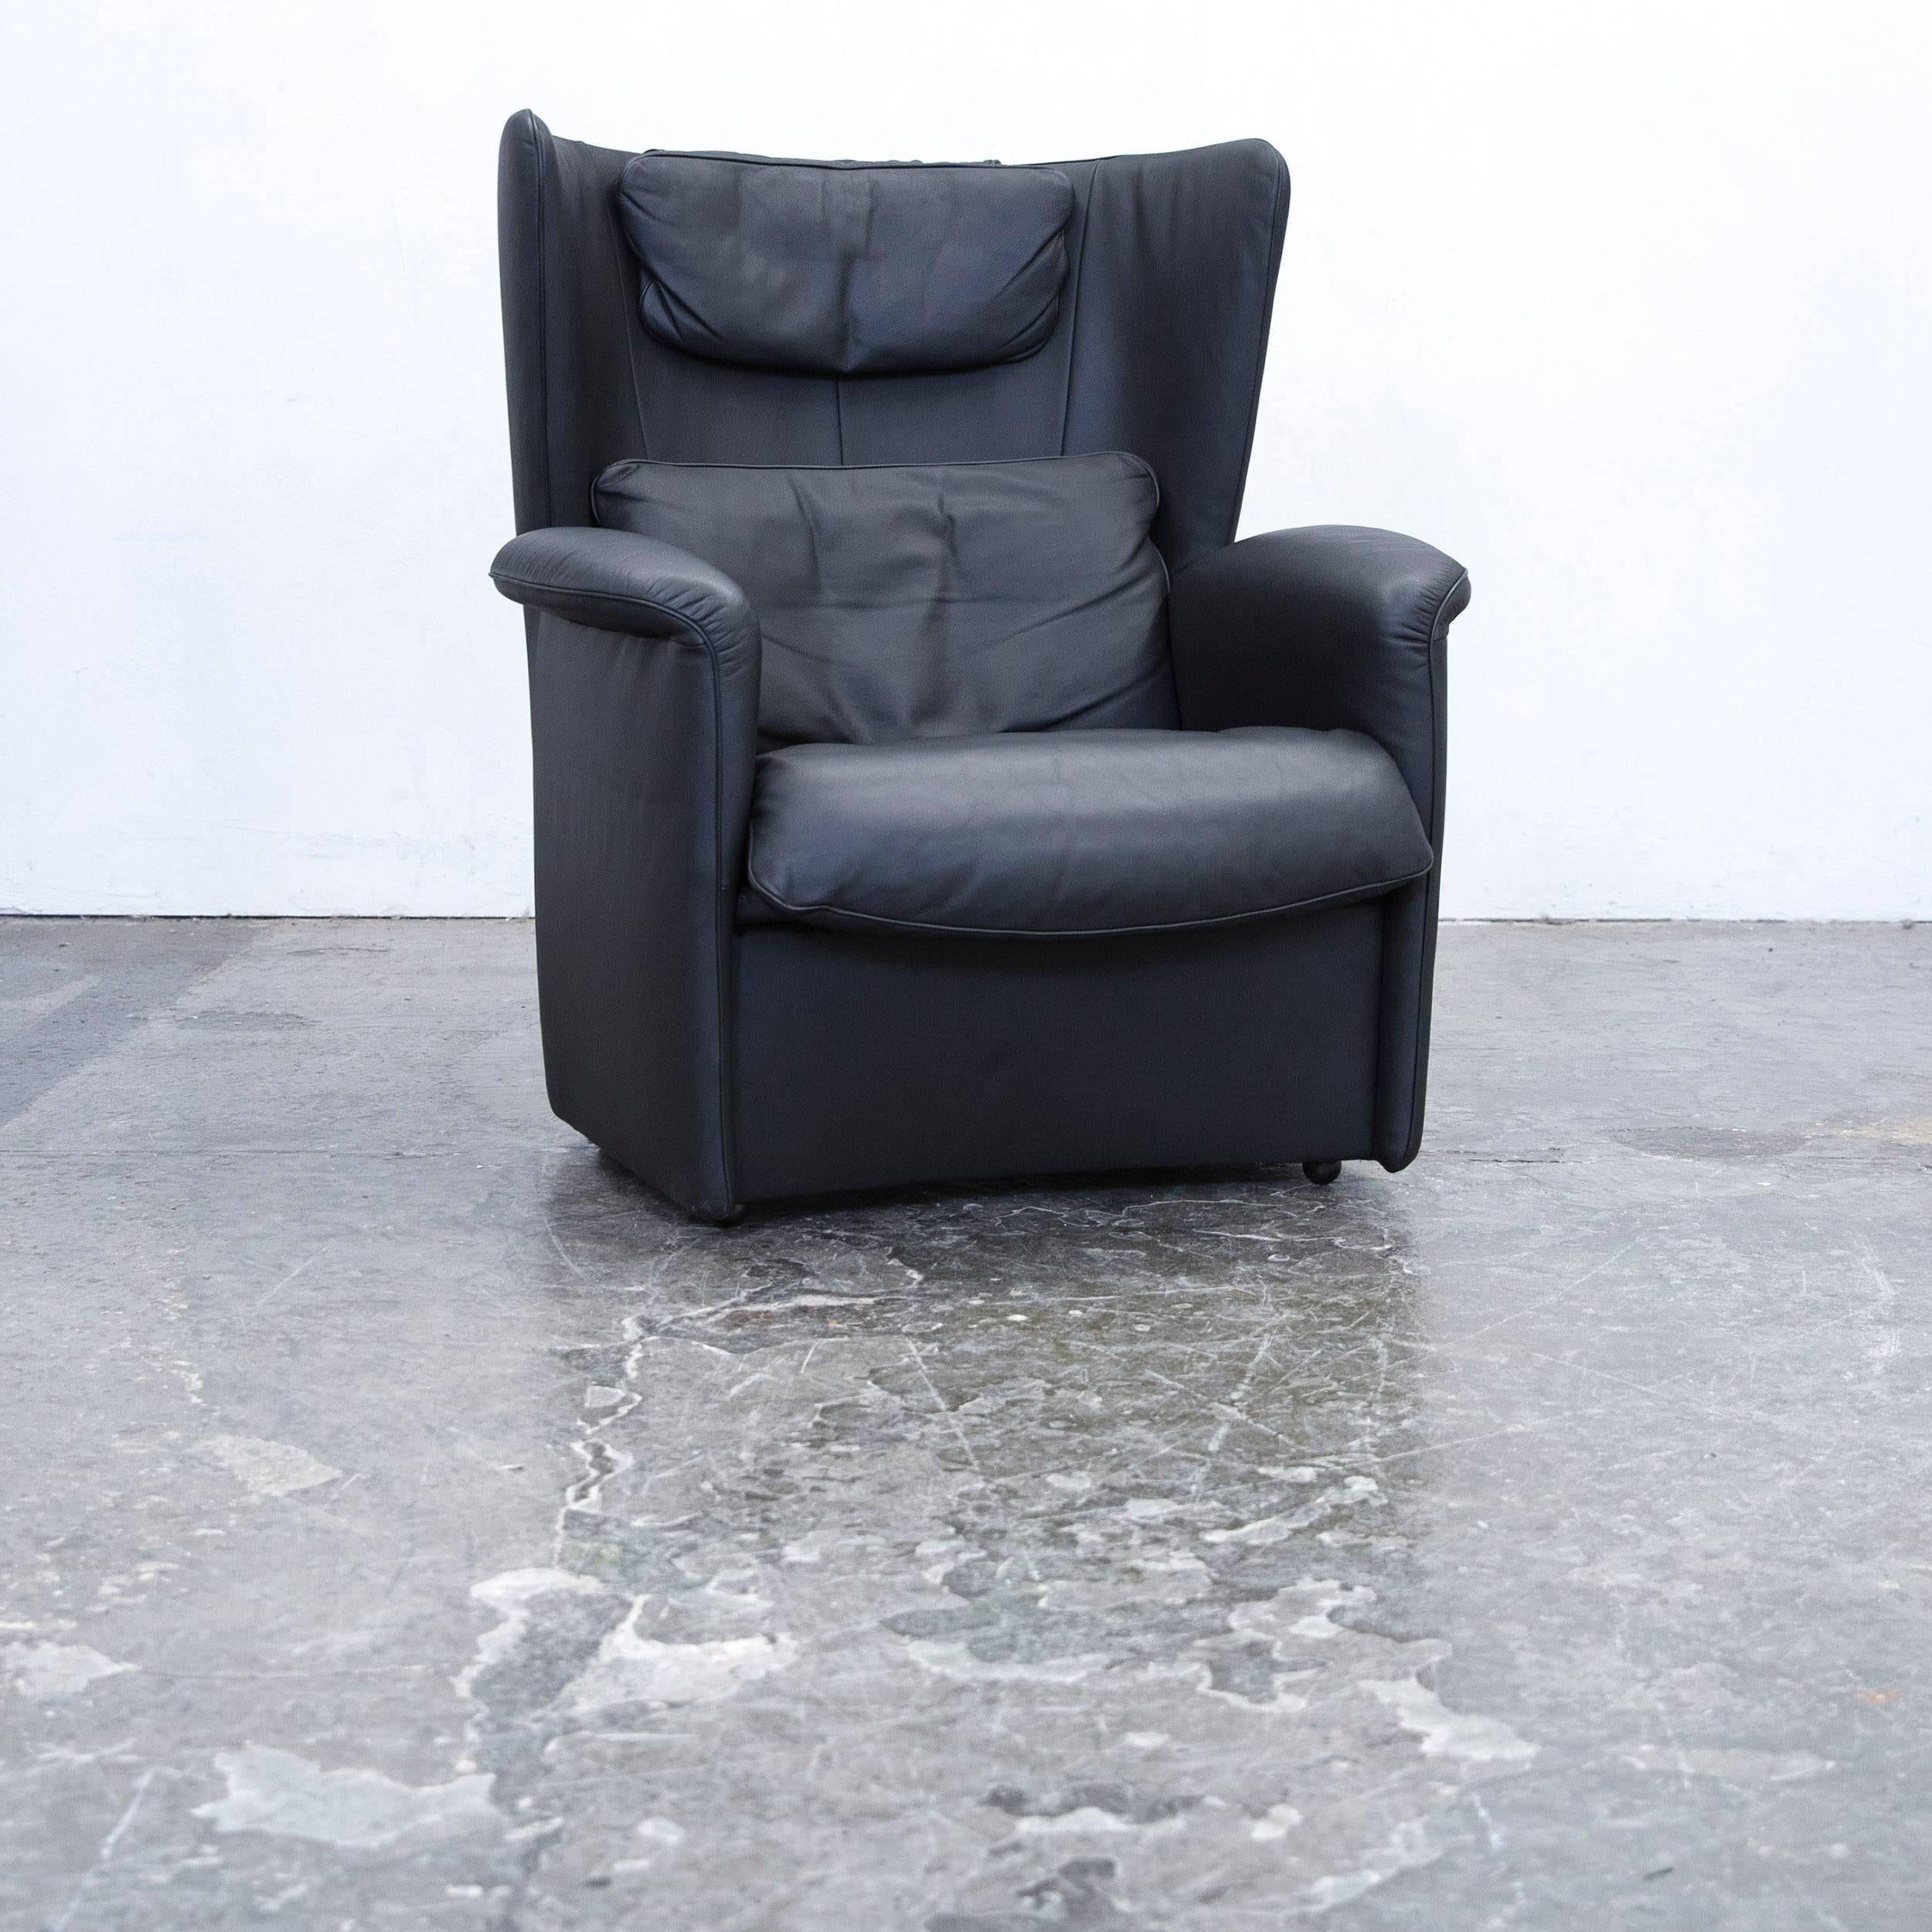 Black colored original De Sede DS 23 designer leather armchair and footrest, in a minimalistic and modern design, made for pure comfort and style.